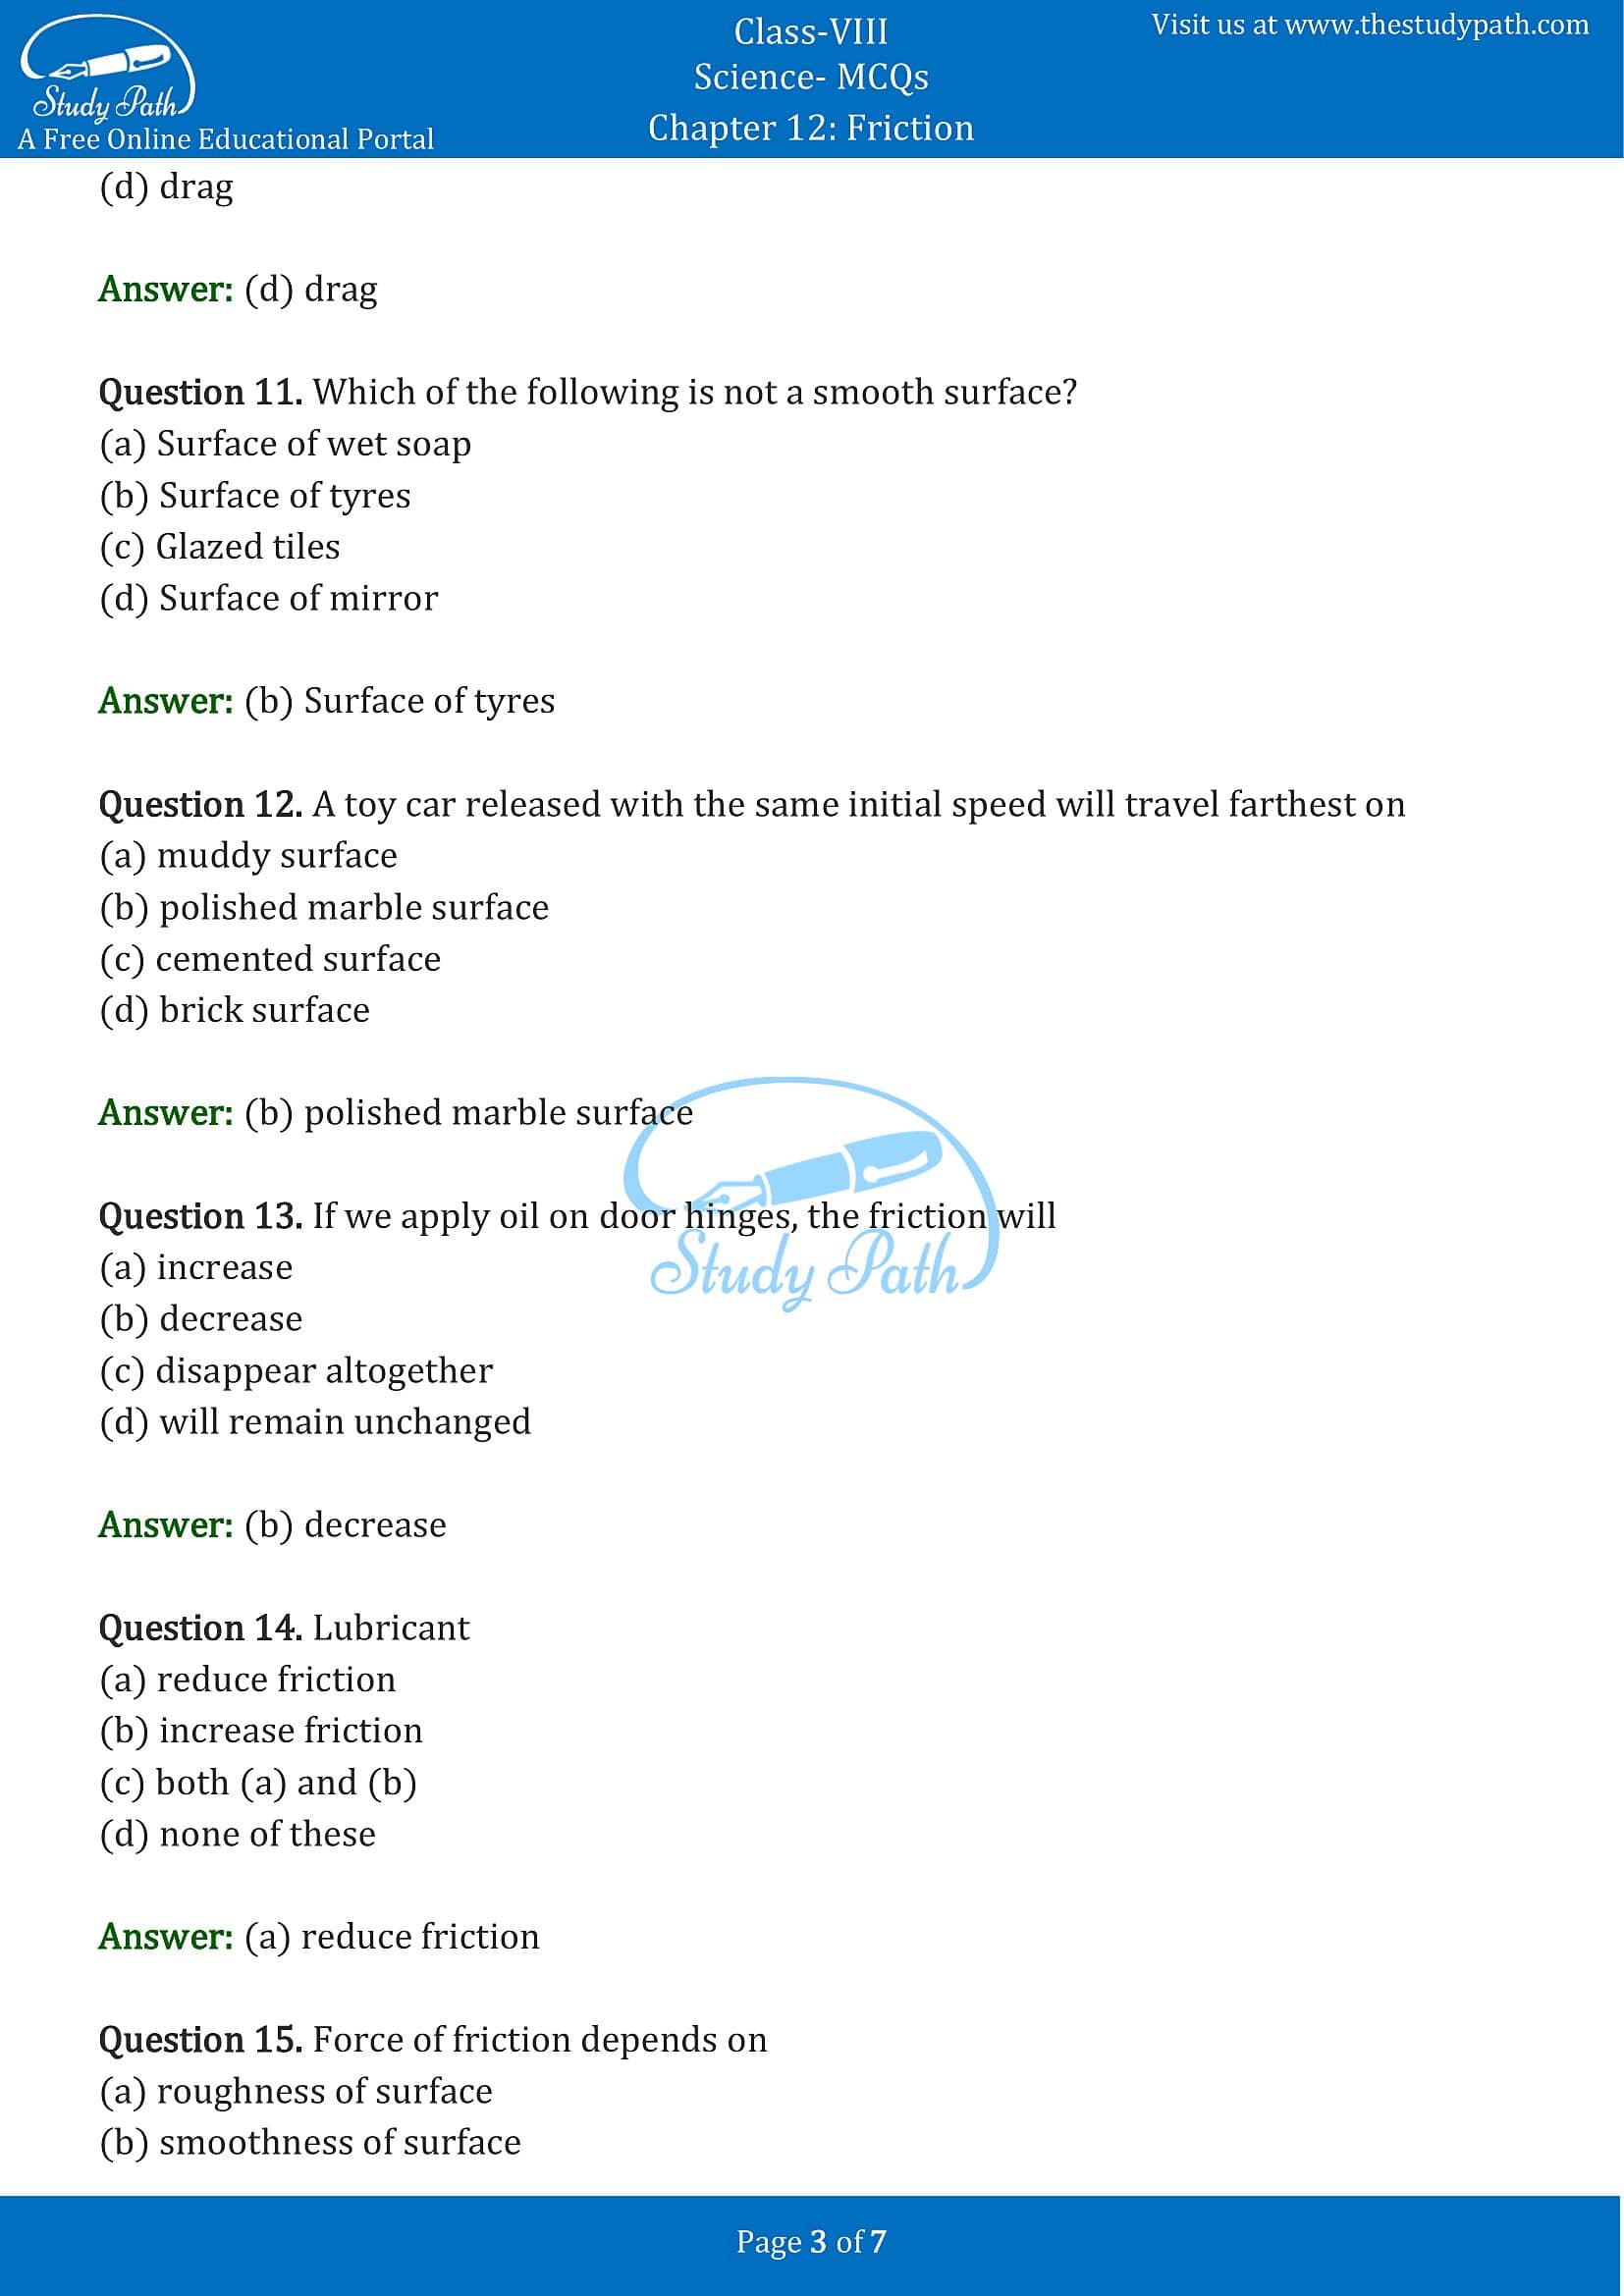 MCQ Questions for Class 8 Science Chapter 12 Friction with Answers PDF -3